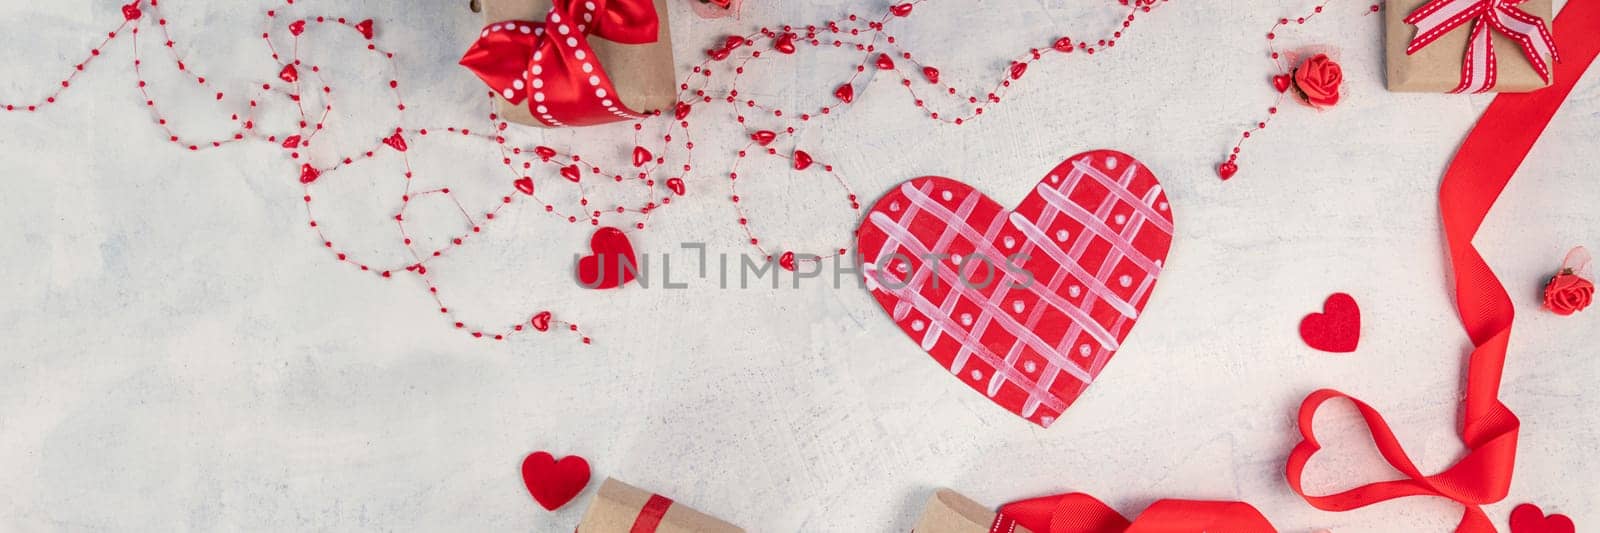 banner of heart from a red ribbon, gifts with a red ribbon and red hearts on a white stone background. Valentine's day background. Valentine's day concept. Flat lay. by Leoschka